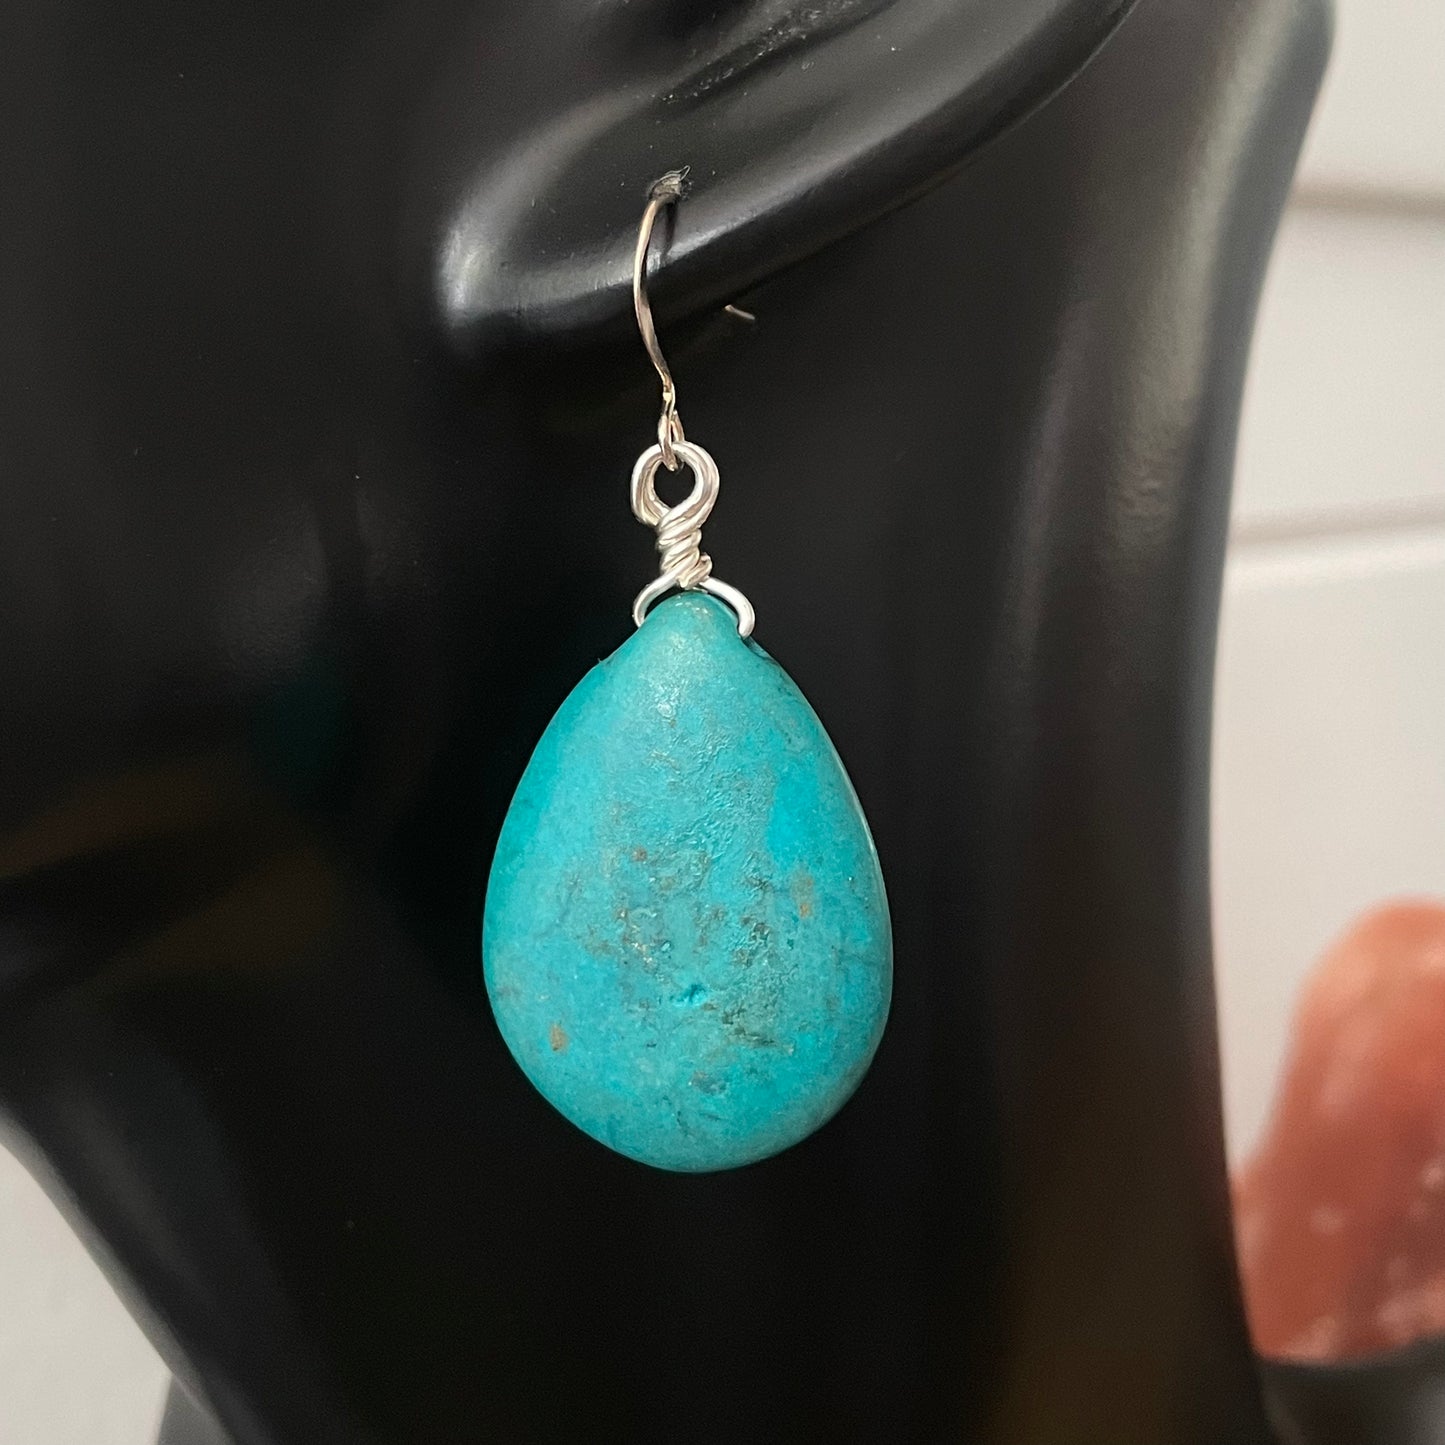 Large Turquoise Teardrop Statement Earrings 2" Boho Wrapped Wire Accent Southwestern Western